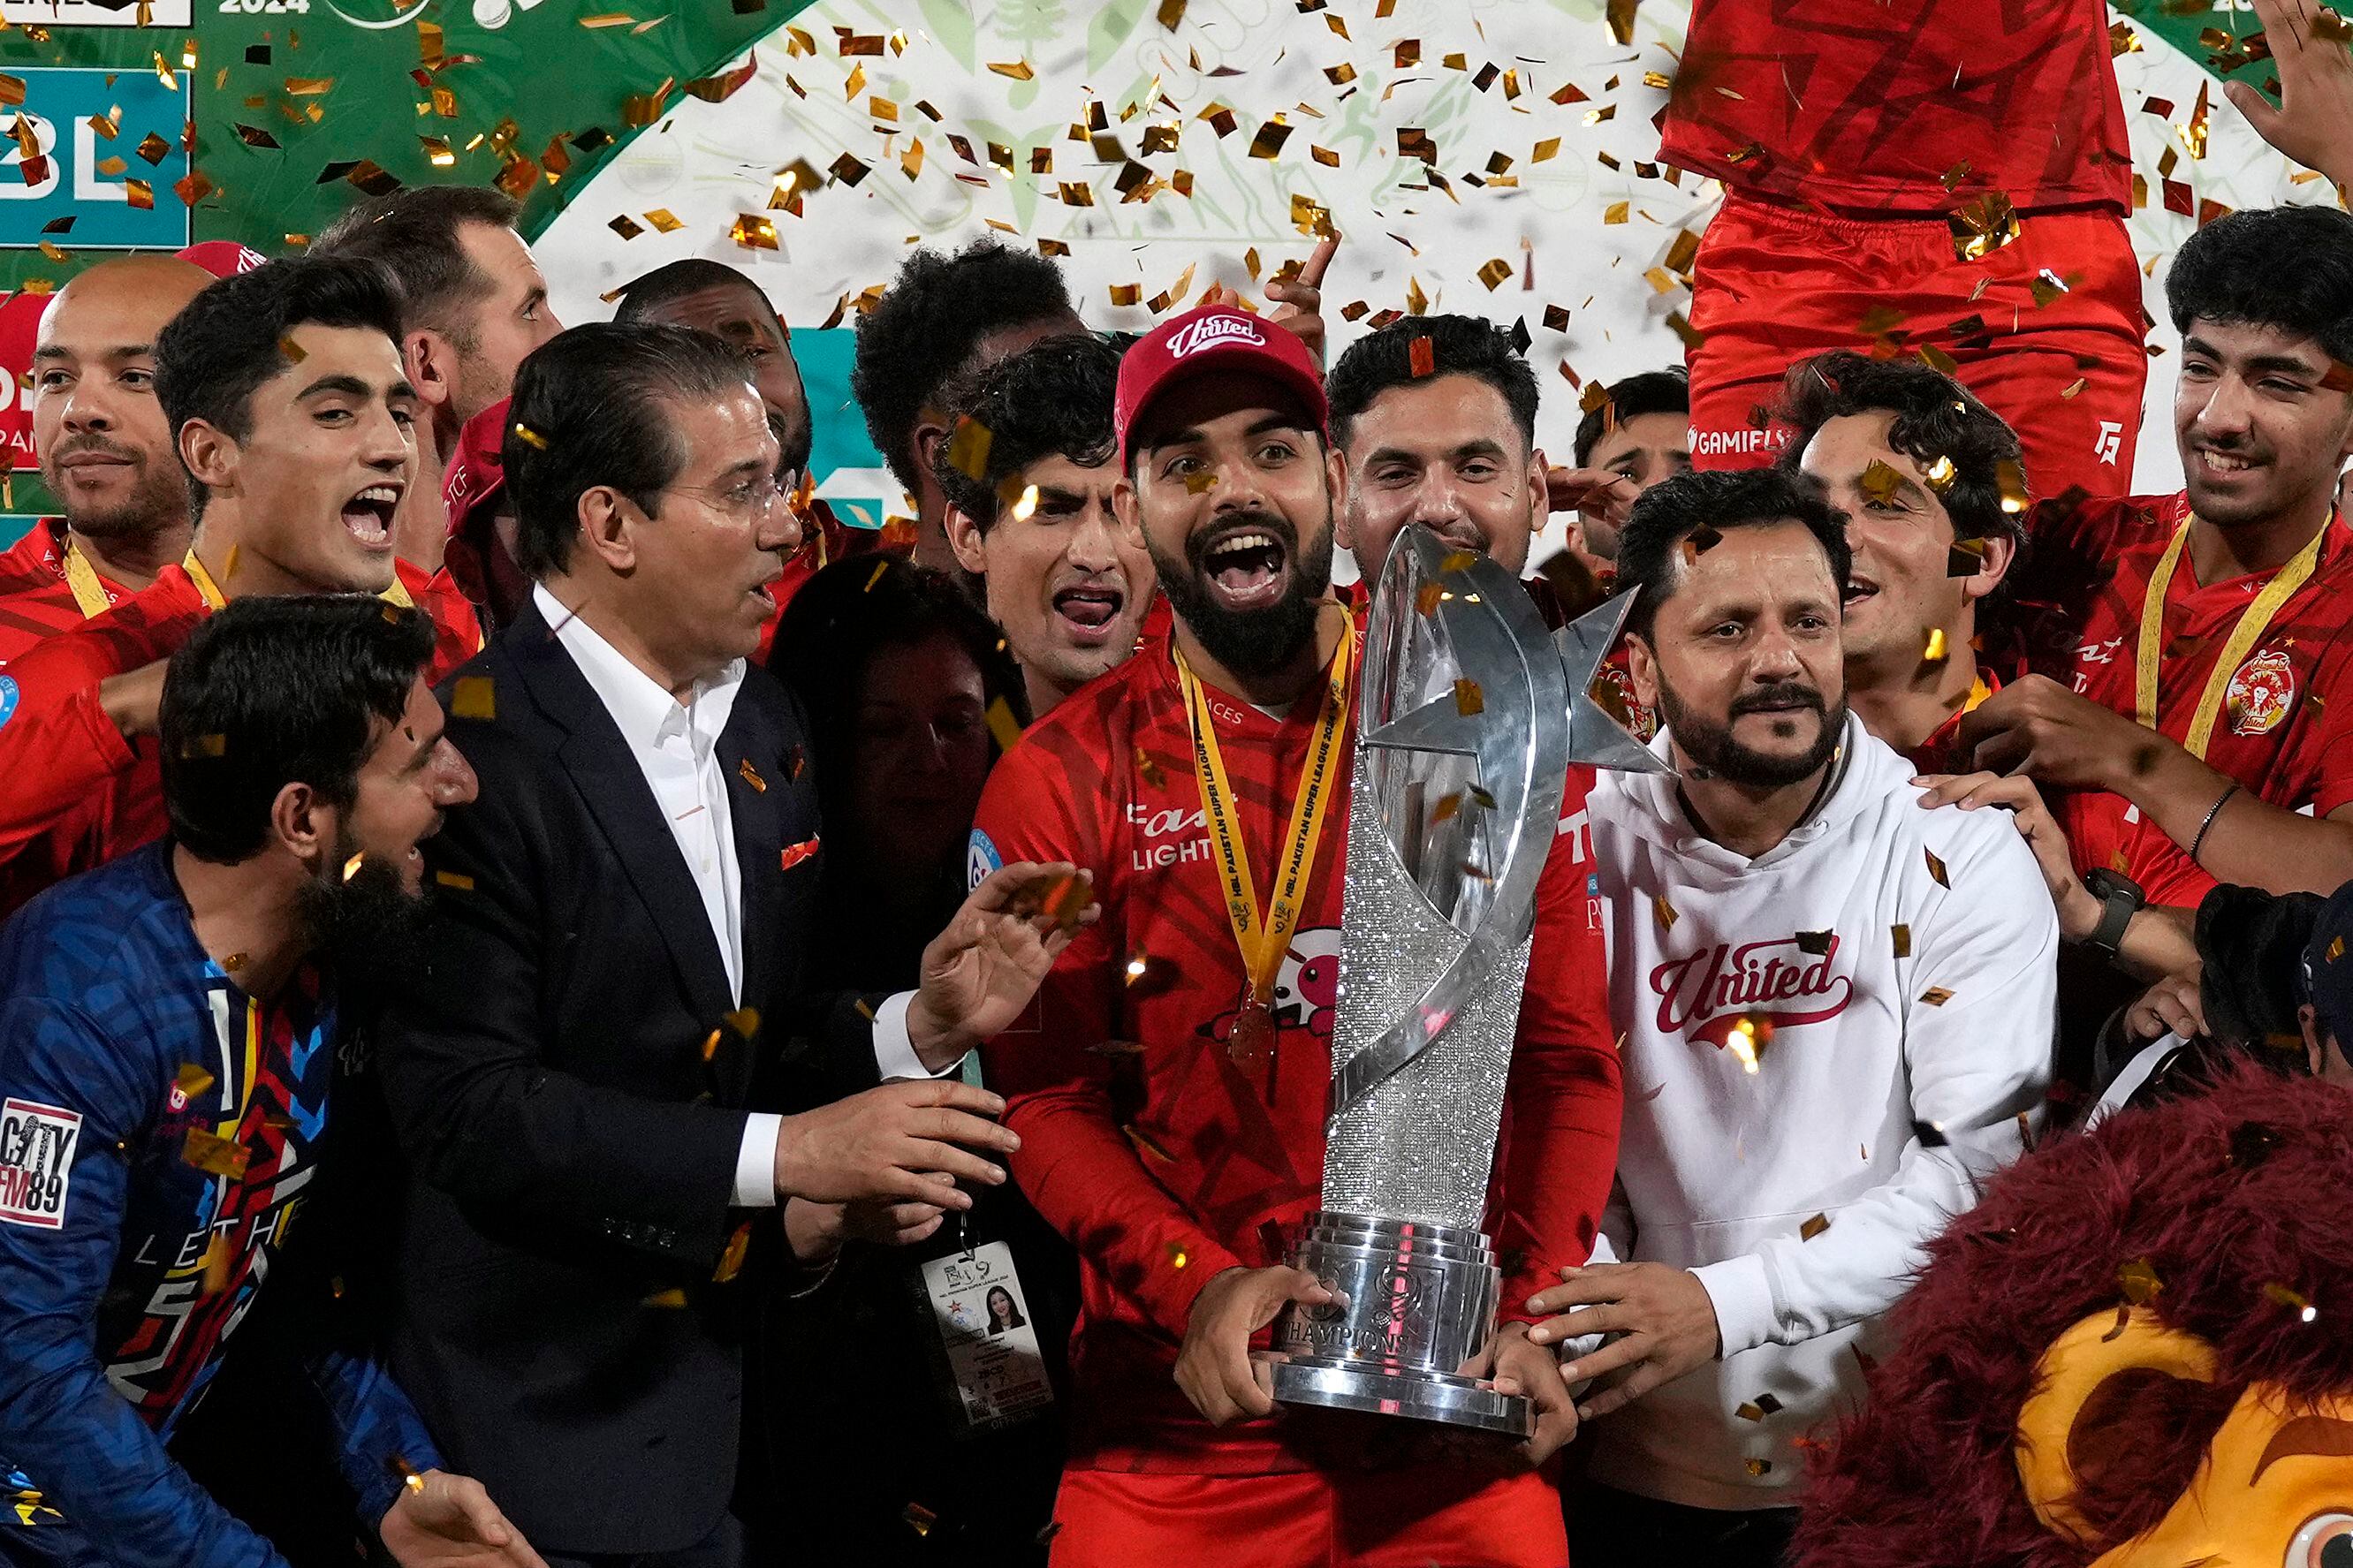 usman khan and muhammad waseem miss out on winners’ medals after epic psl final